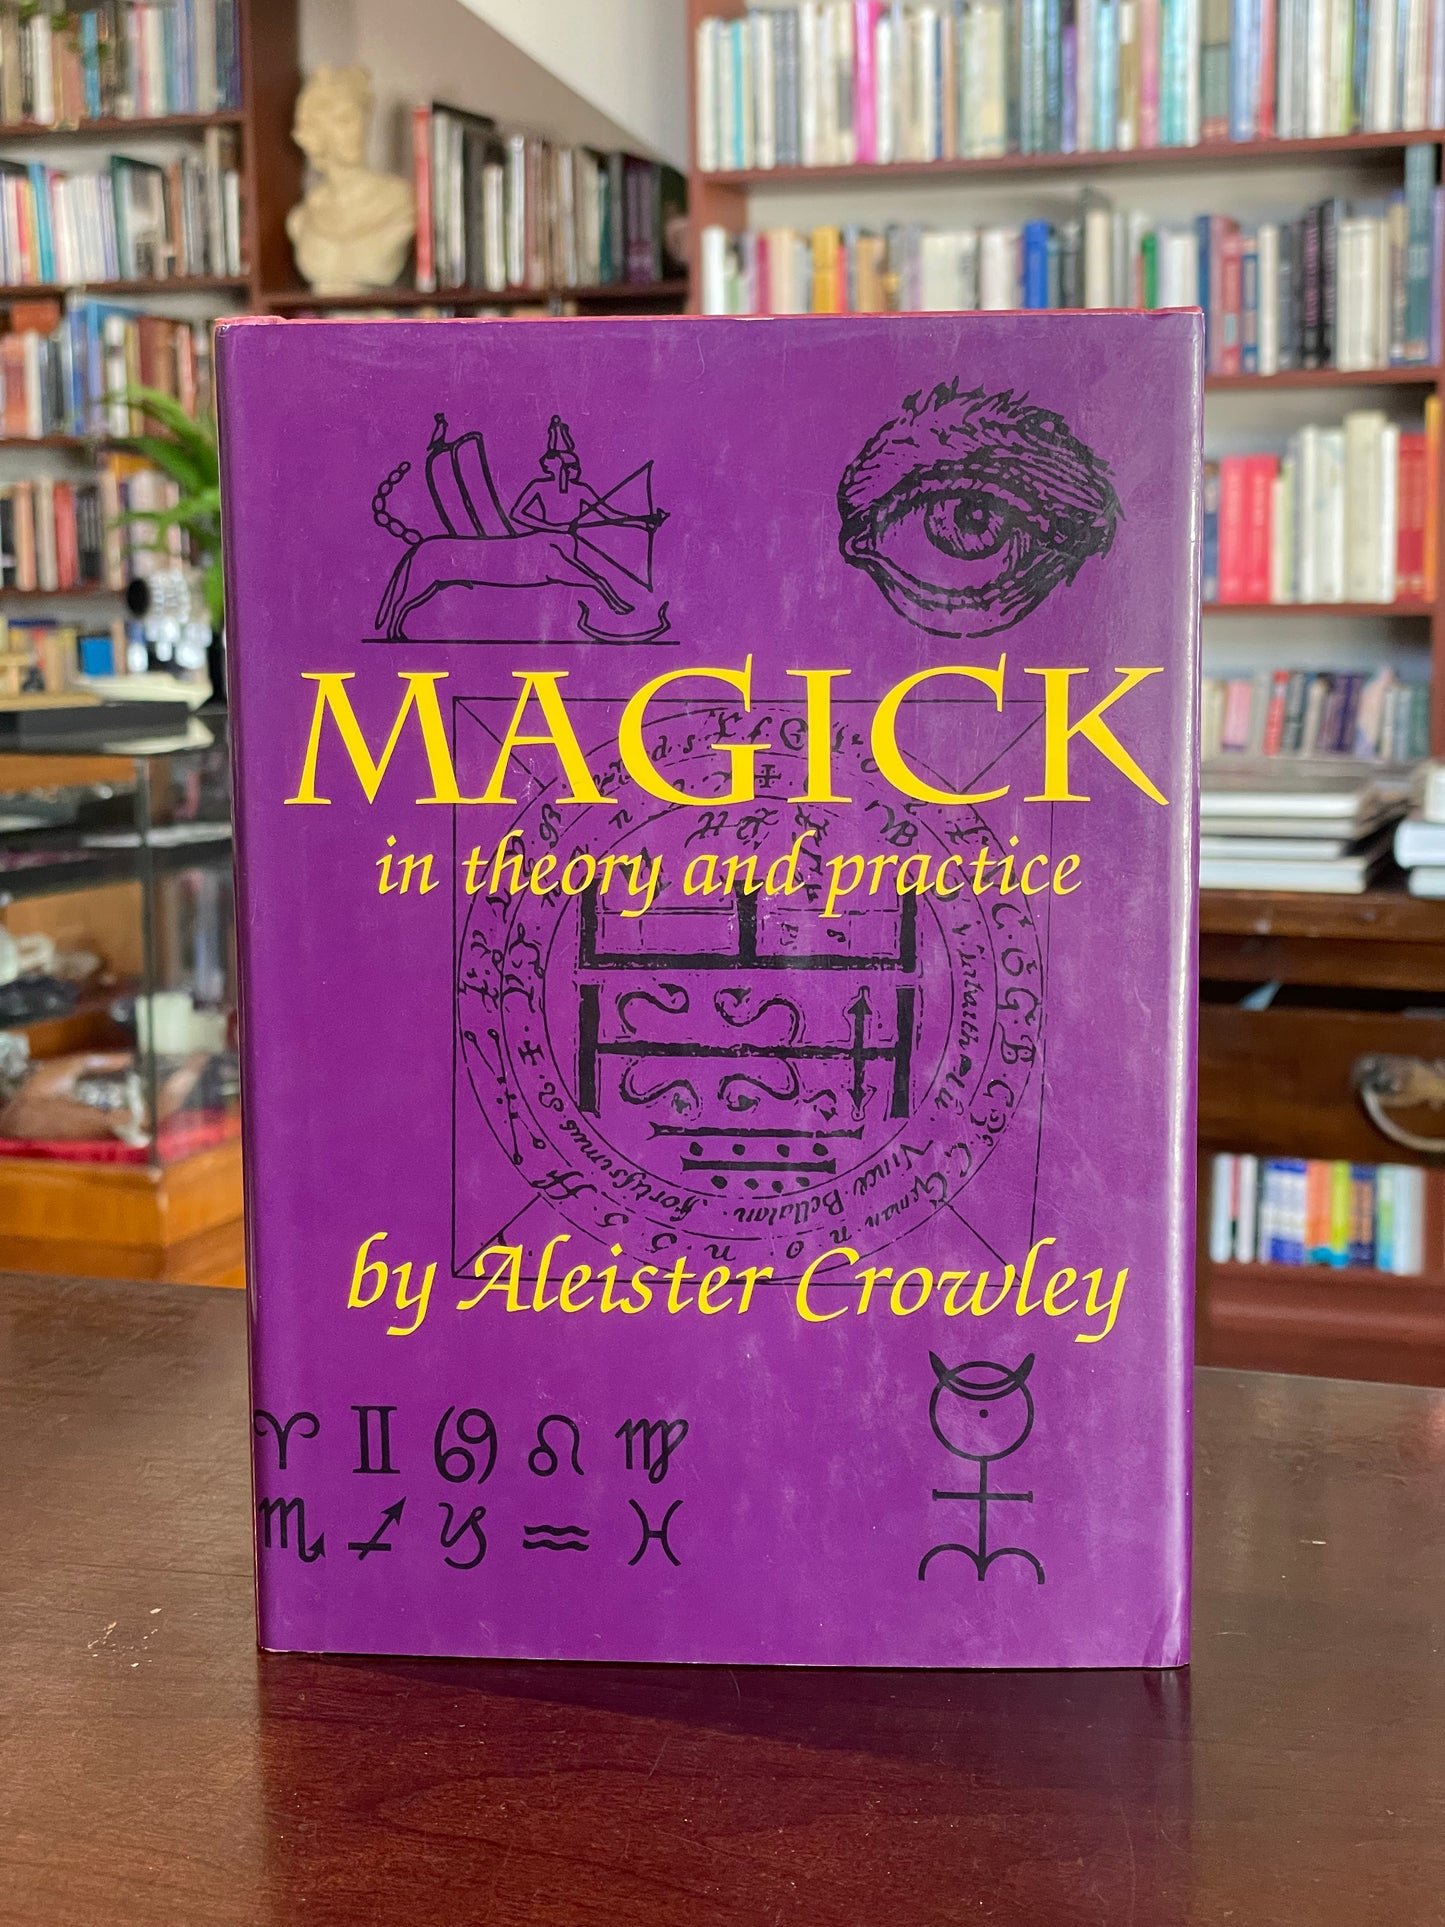 Magick In Theory And Practice by Aleister Crowley l